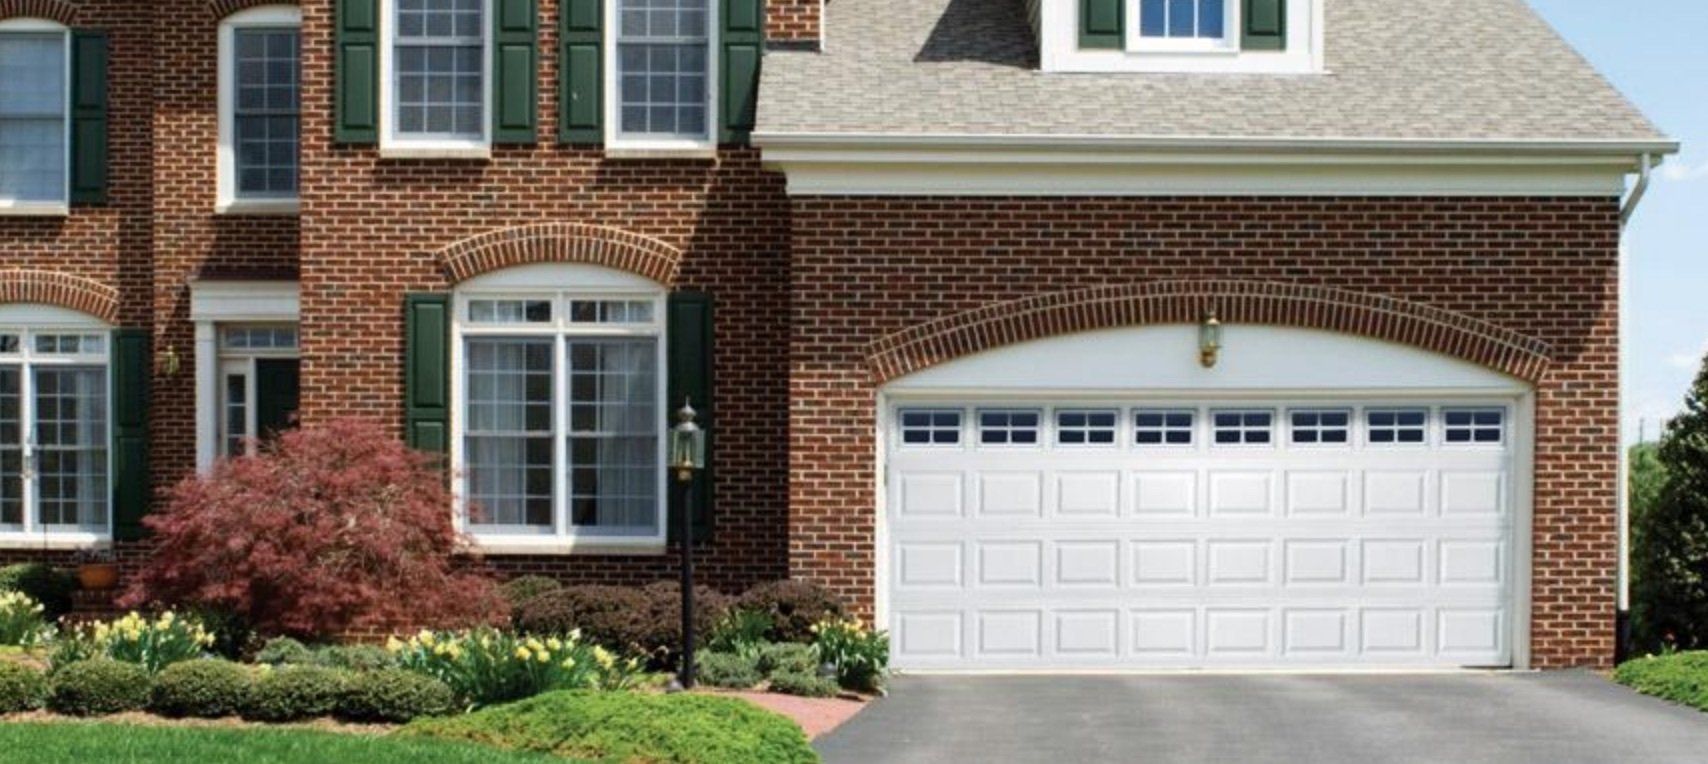 With Glenn’s Garage Doors, Your Mid-MO Home Can Have a Fresh New Look! Call Today.